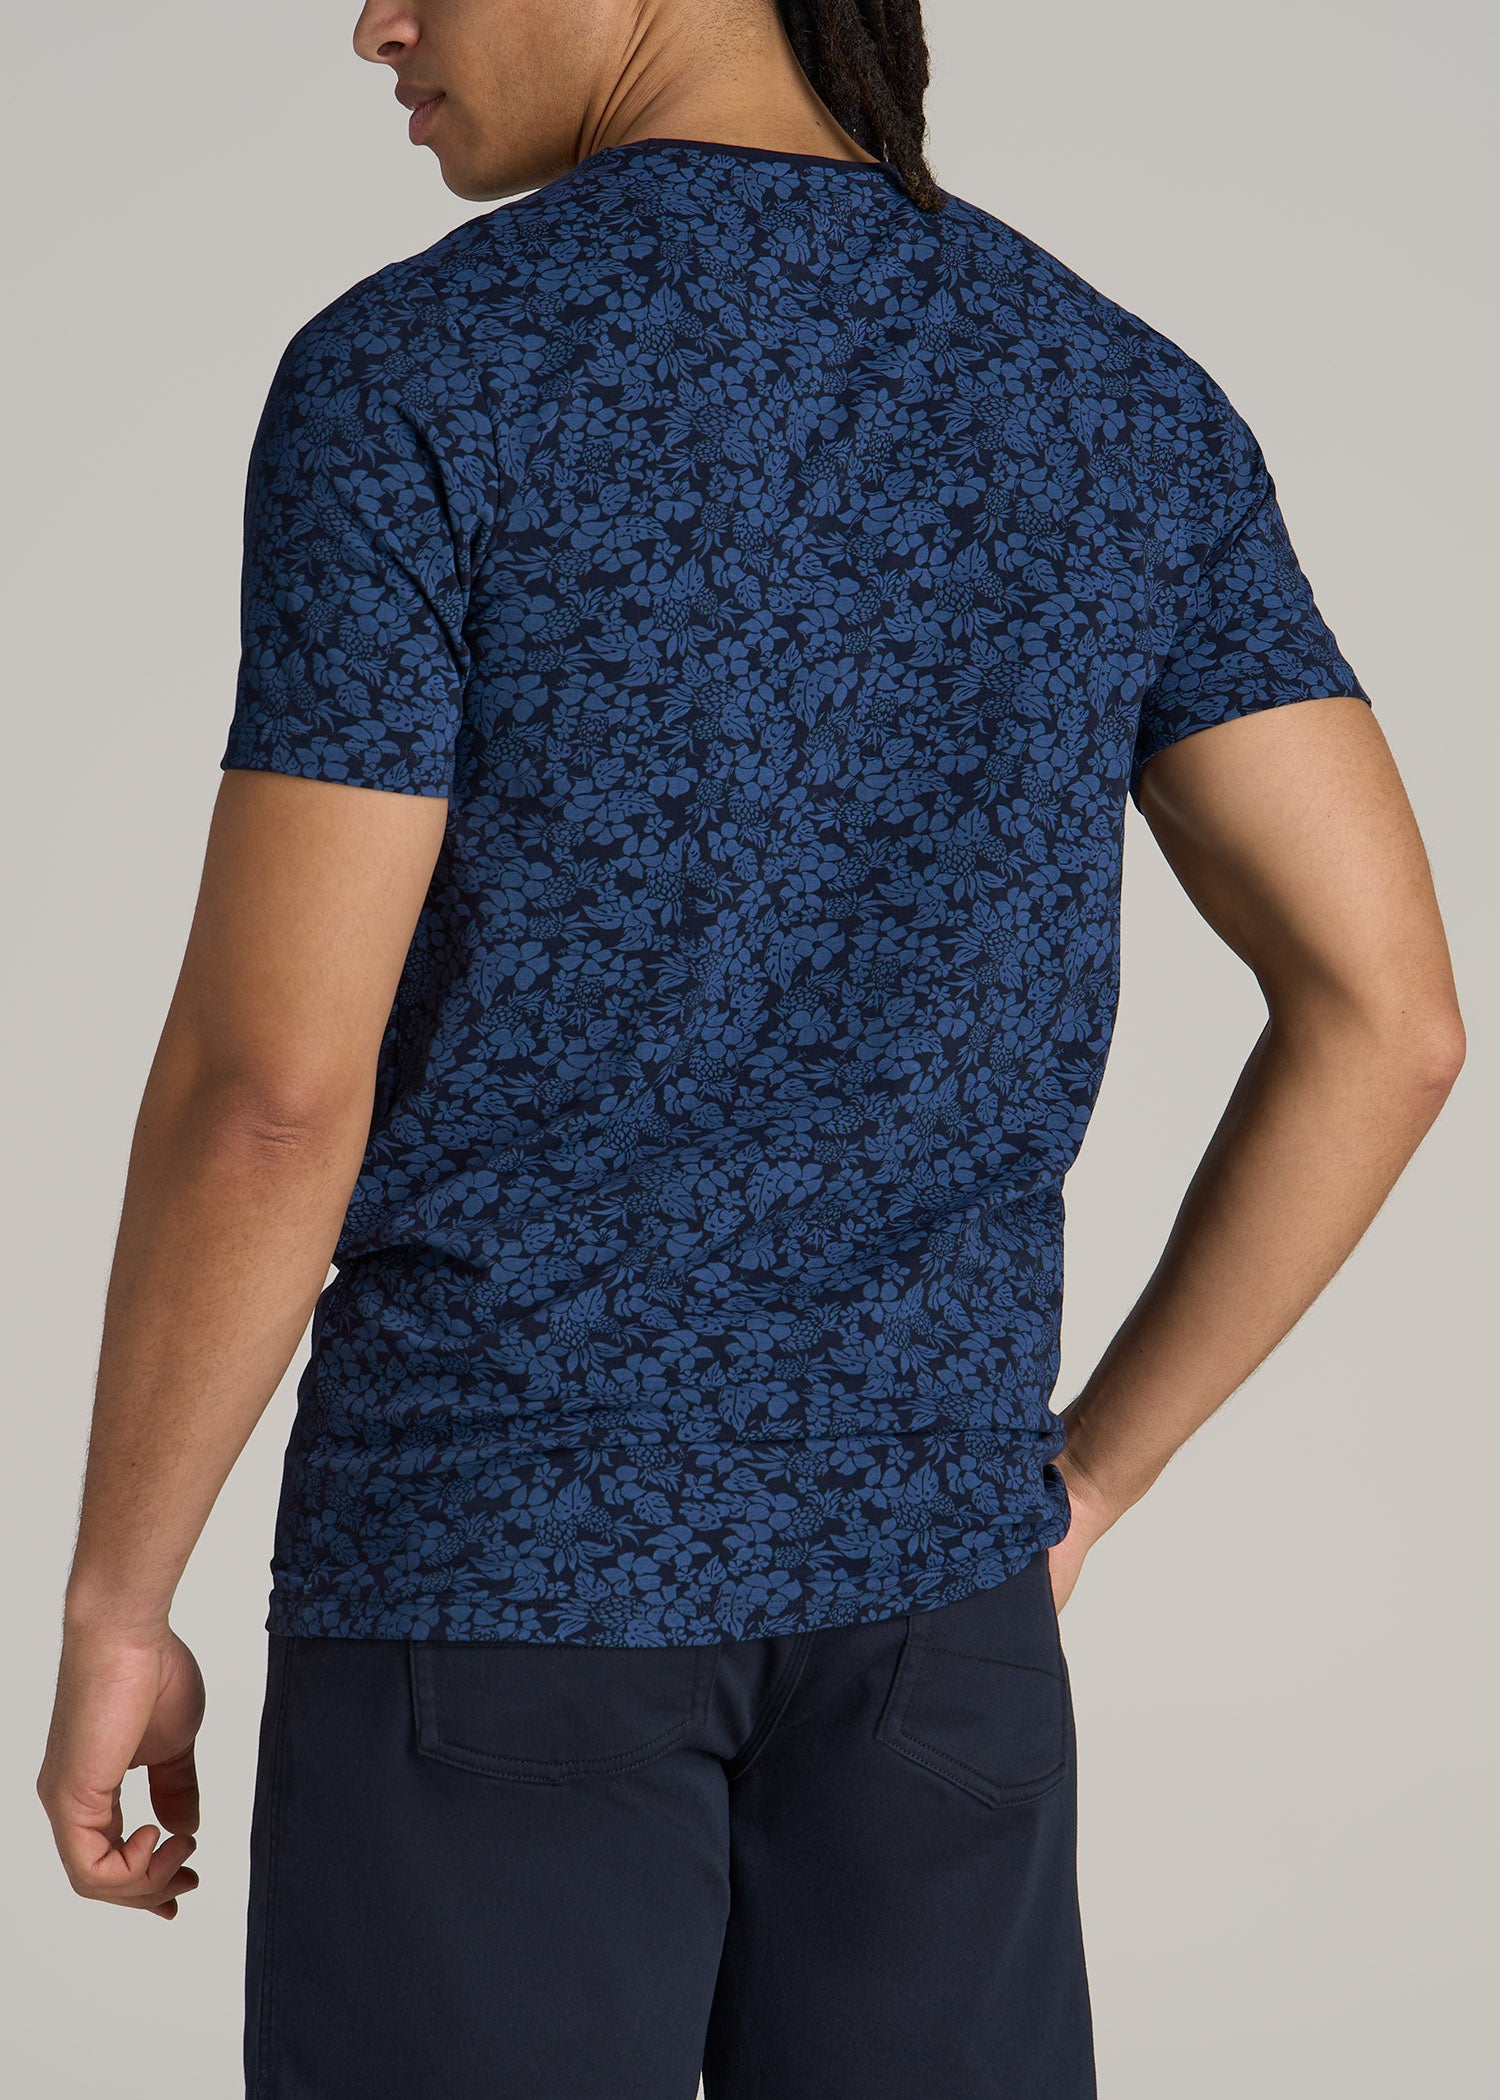 Stretch Pima Cotton Printed Tee for Tall Men